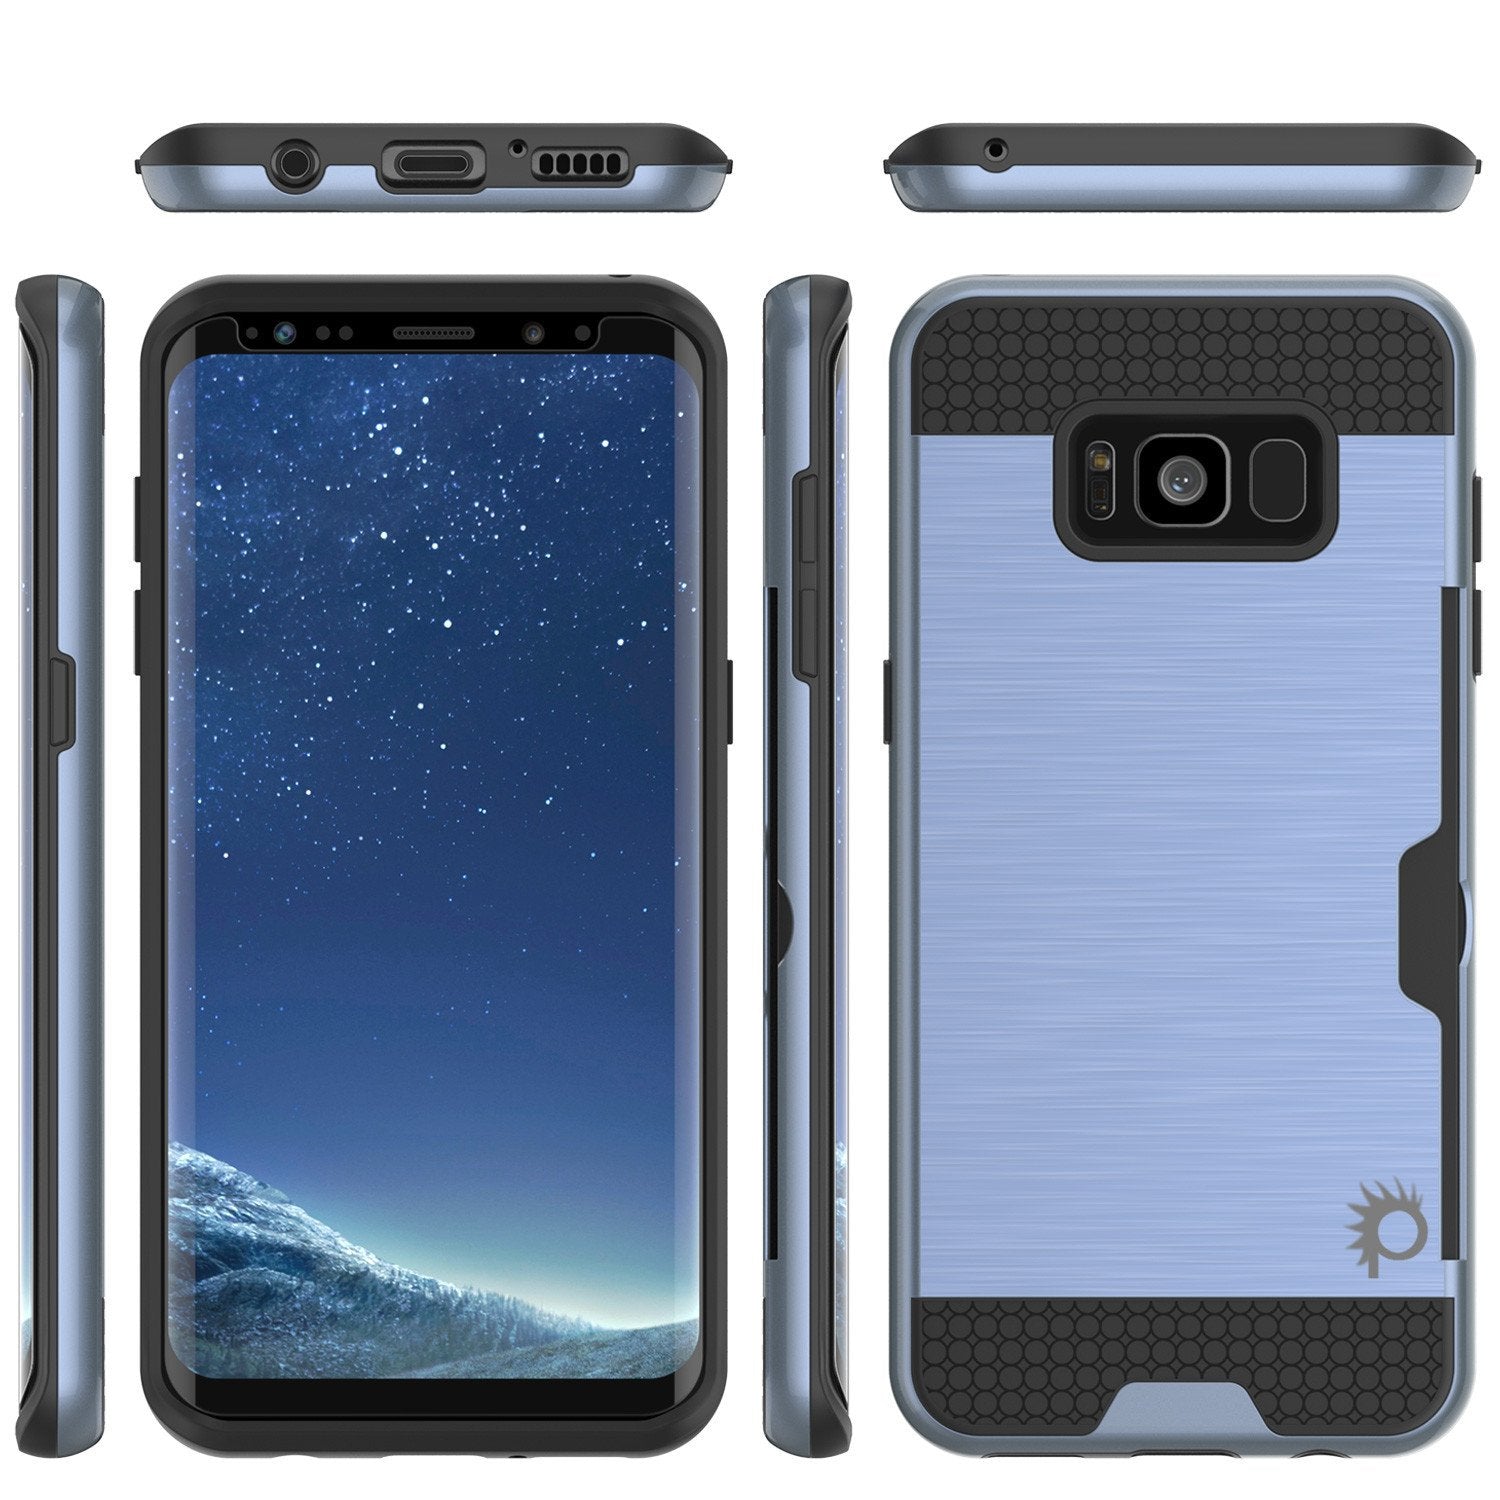 Galaxy S8 Case, PUNKcase [SLOT Series] [Slim Fit] Dual-Layer Armor Cover w/Integrated Anti-Shock System, Credit Card Slot & PUNKSHIELD Screen Protector for Samsung Galaxy S8[Navy] - PunkCase NZ